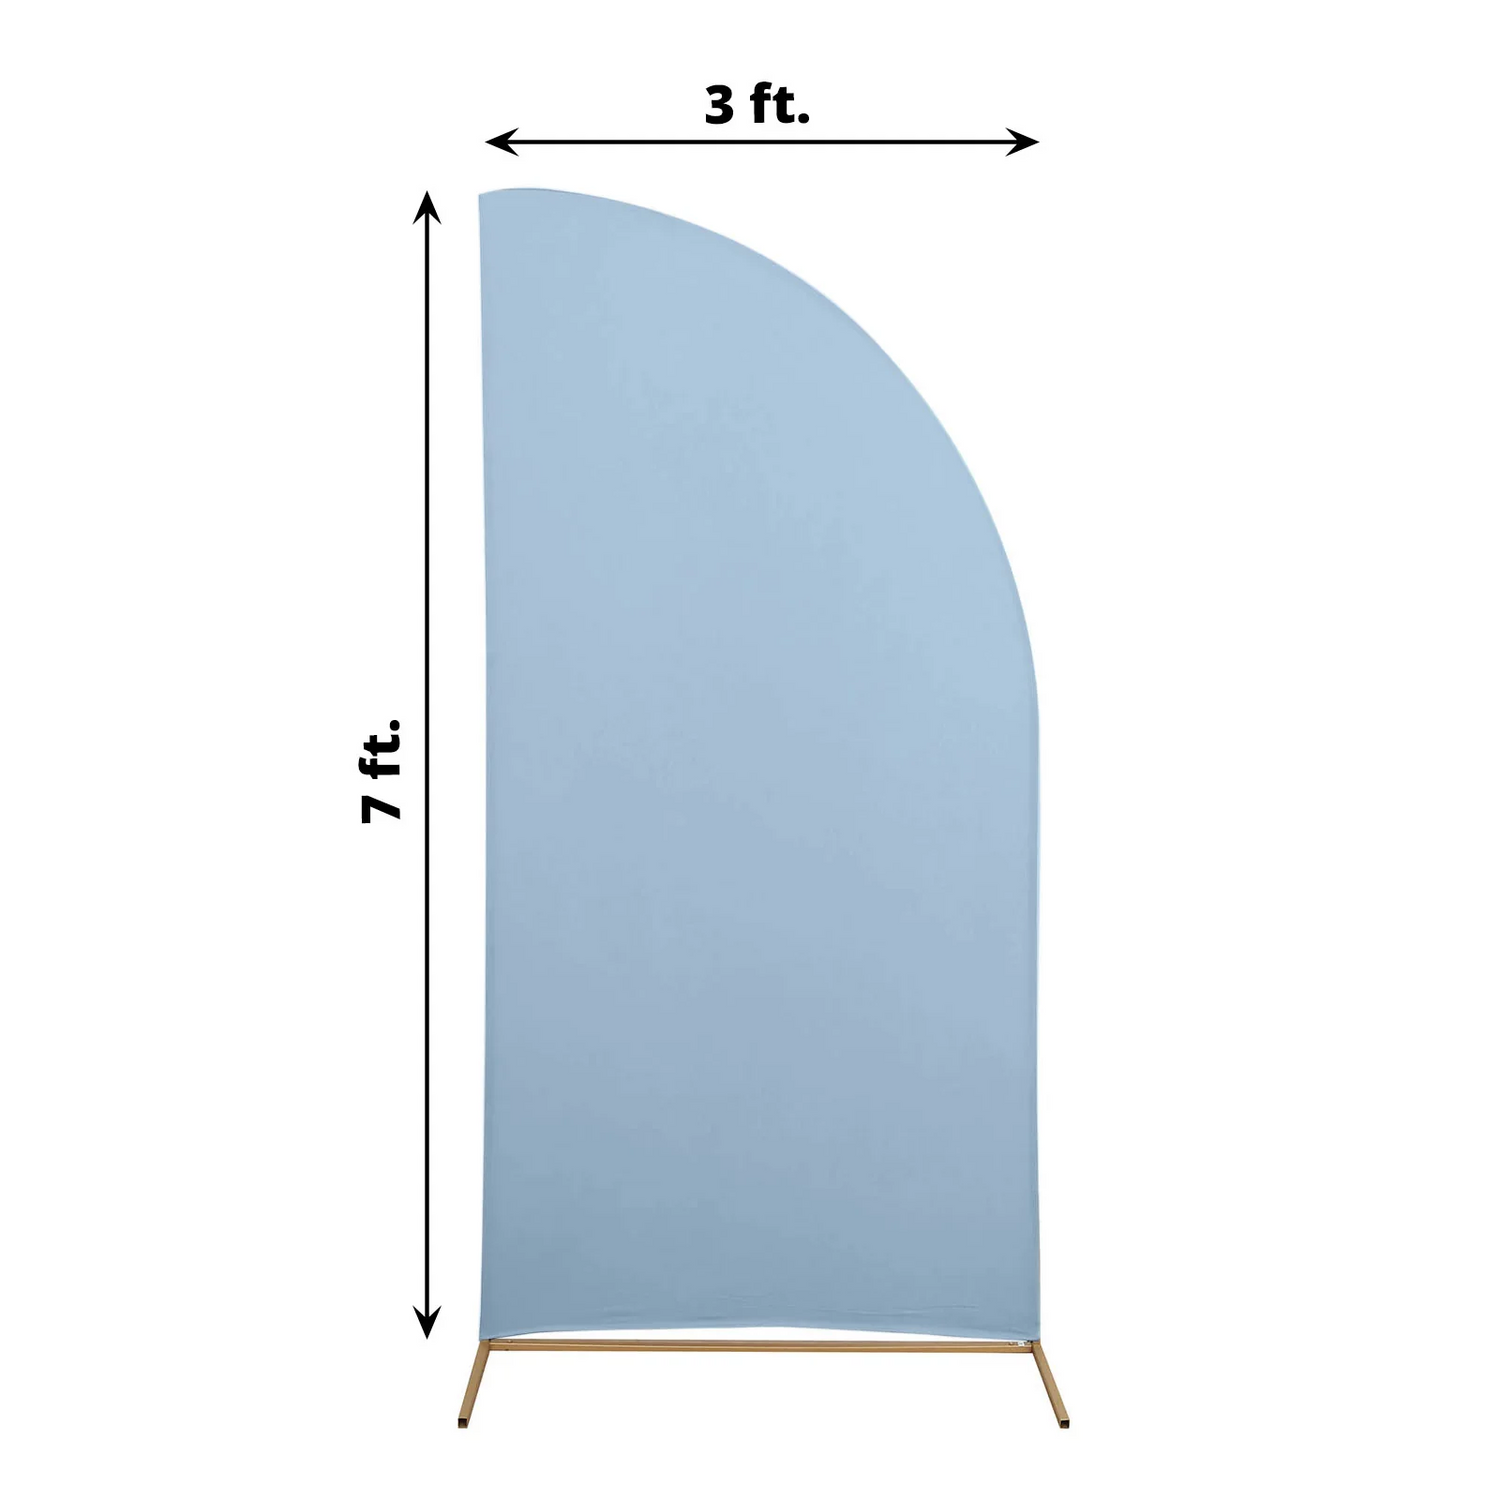 Matte Dusty Blue Fitted Spandex Half Moon Wedding Backdrop Stand Cover Rose Morning